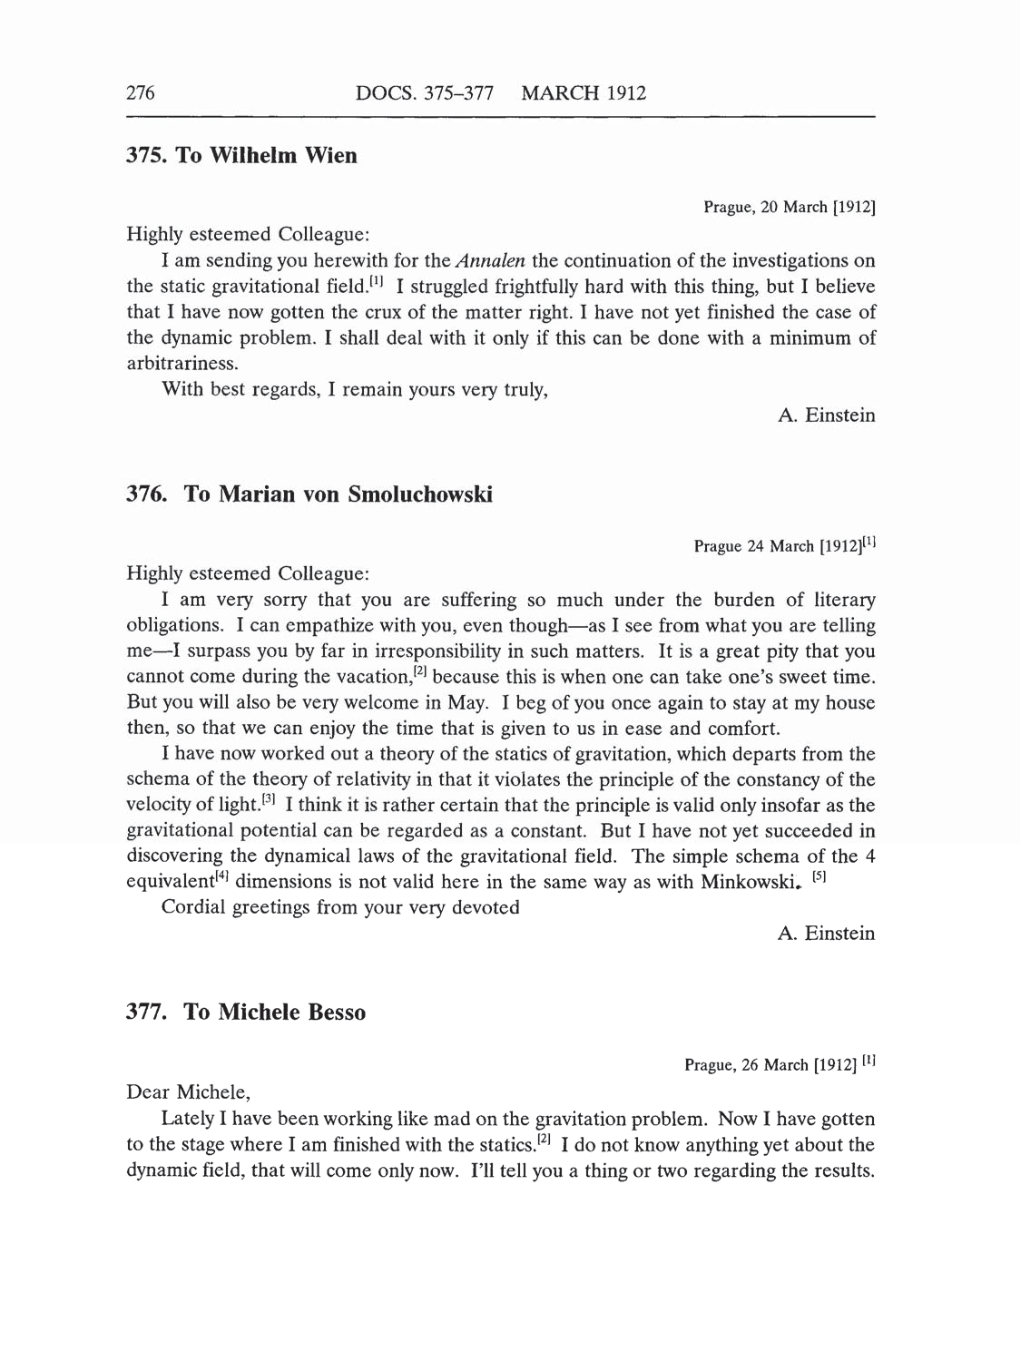 Volume 5: The Swiss Years: Correspondence, 1902-1914 (English translation supplement) page 276